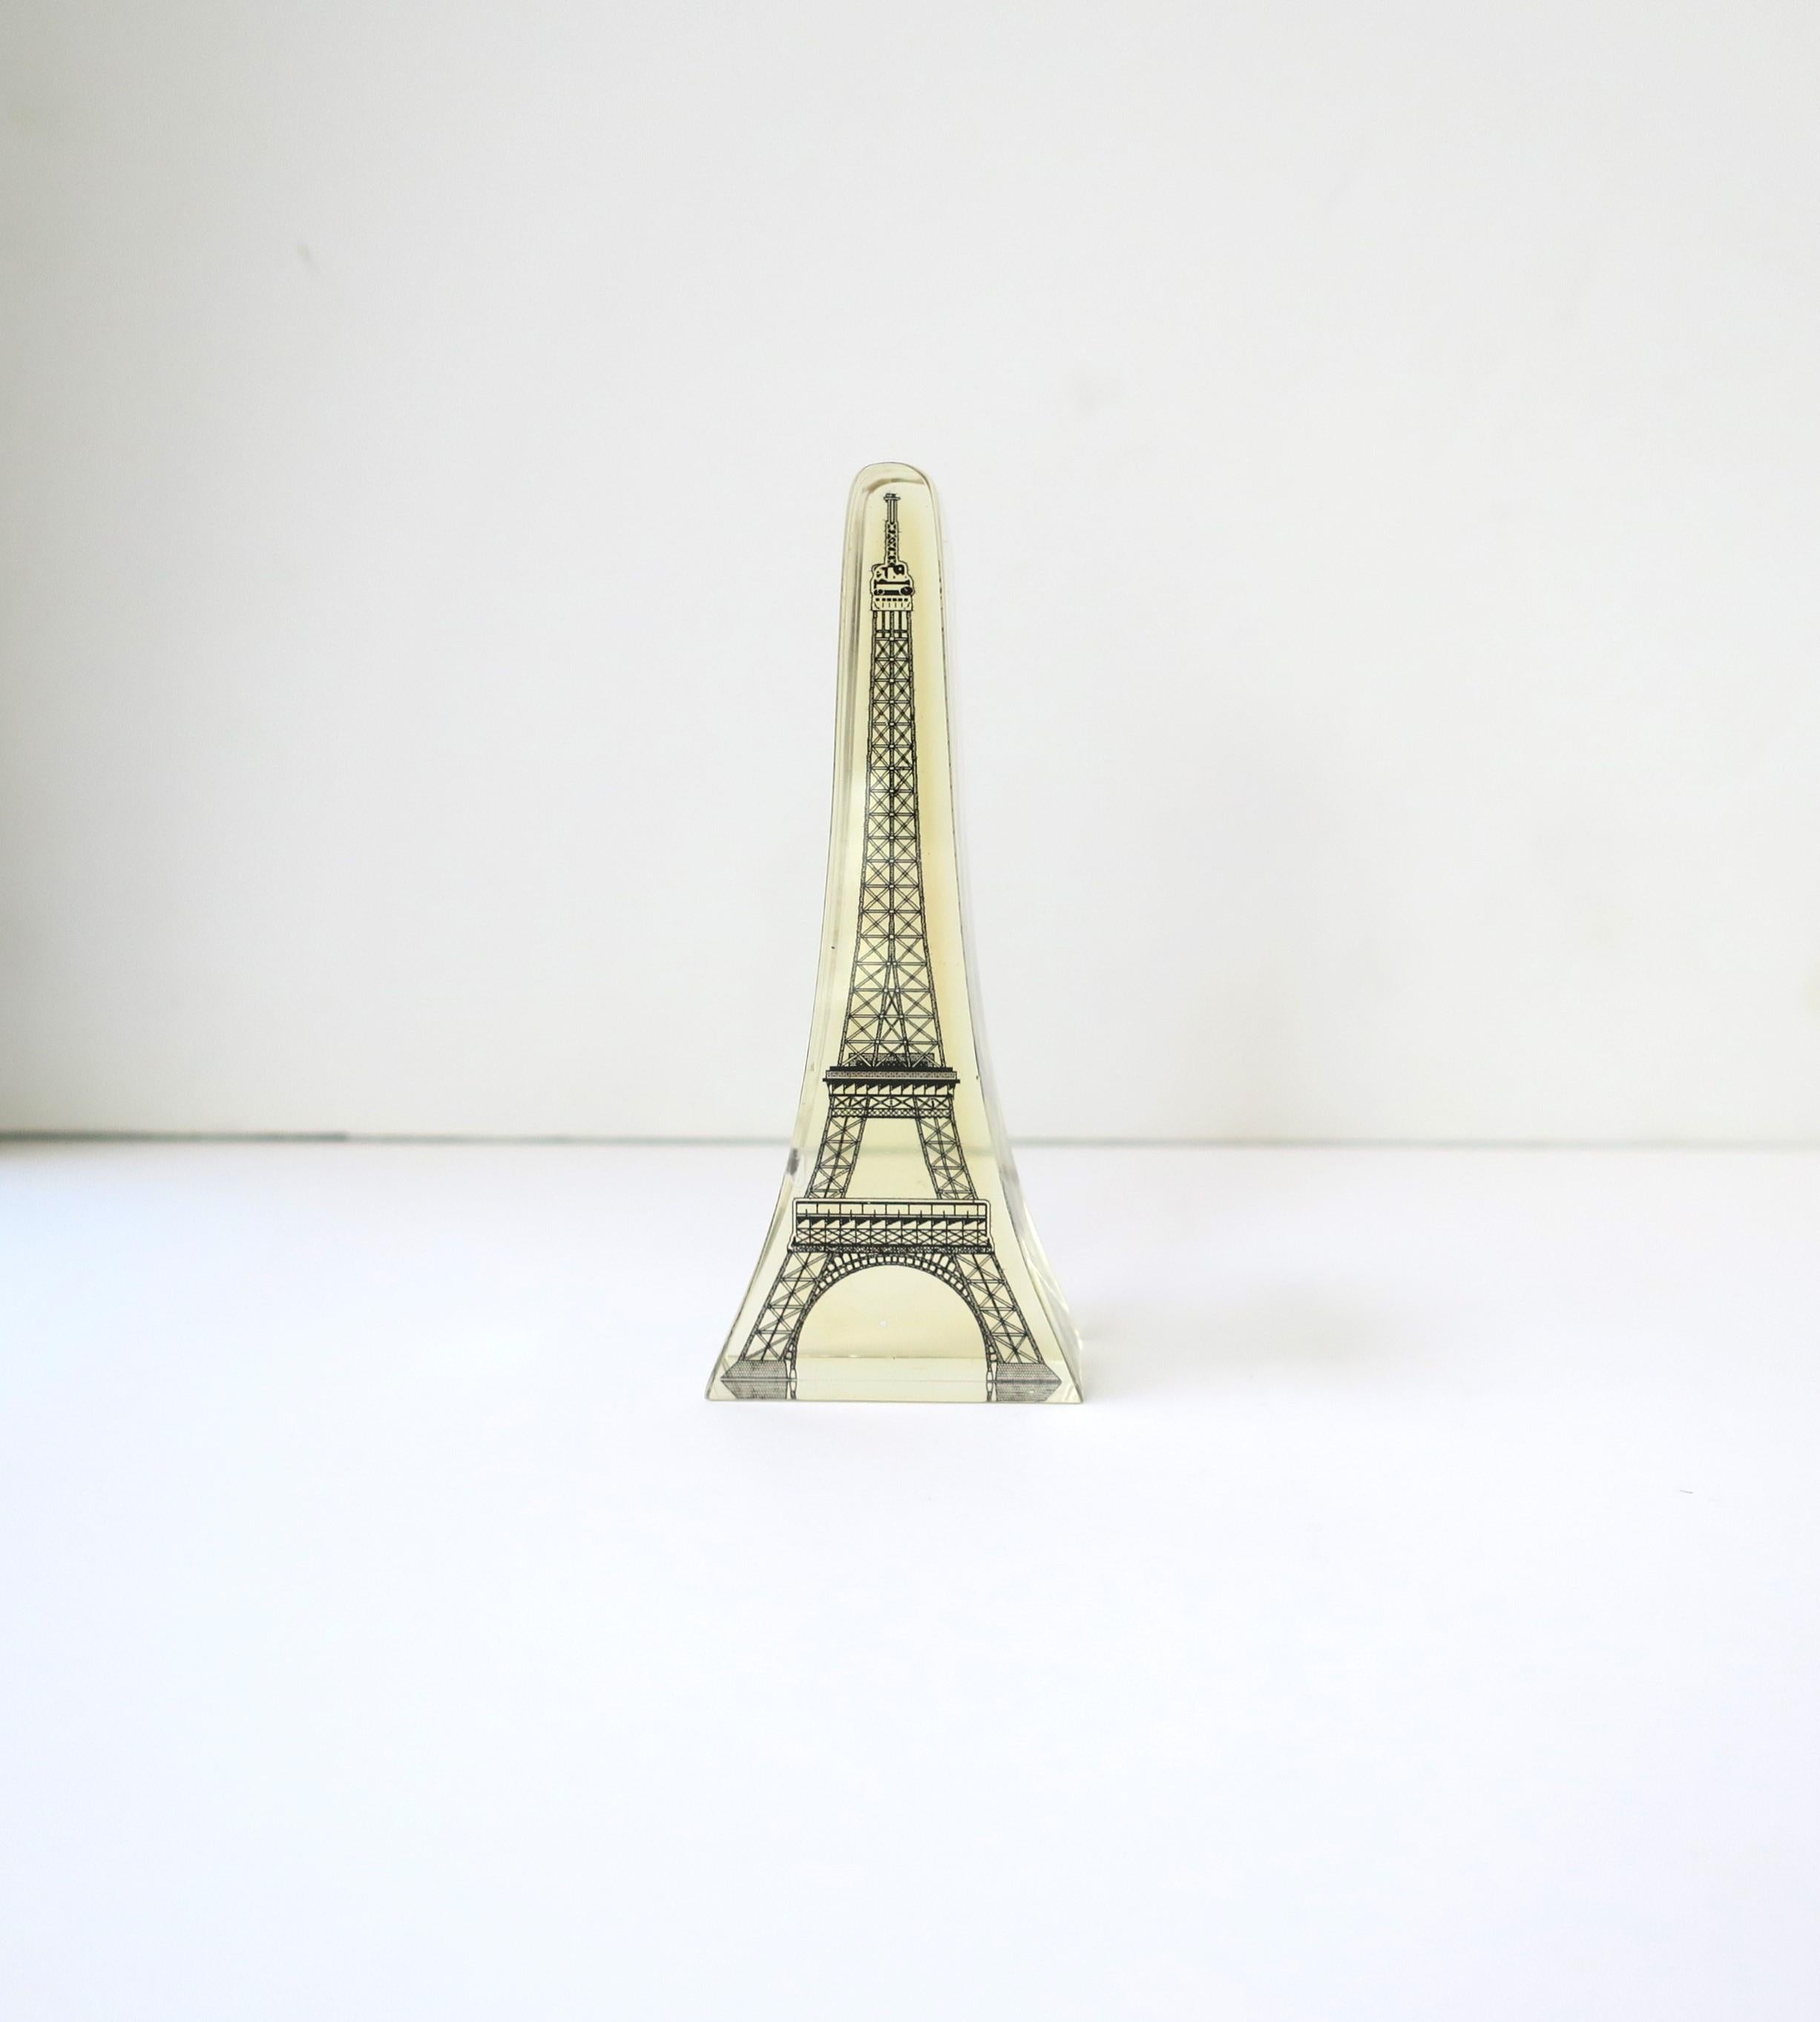 An Op-Art resin/acrylic Paris Eiffel Tower decorative object in the style of Brazilian Artist, Abraham Palatnik. A great desk accessory or gift. Dimensions: 1.38